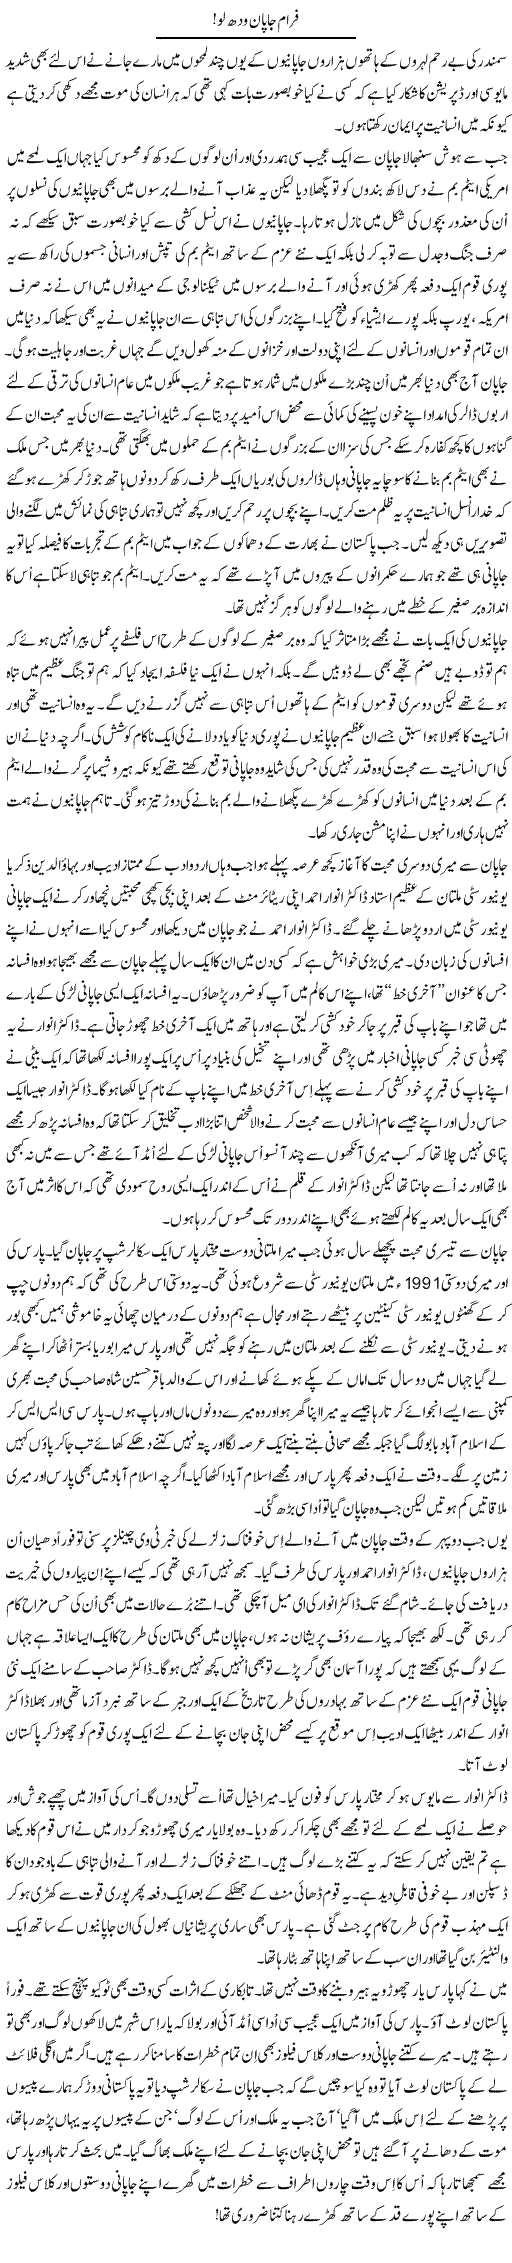 From Japan With love Express Column Rauf Klasra 17 March 2011